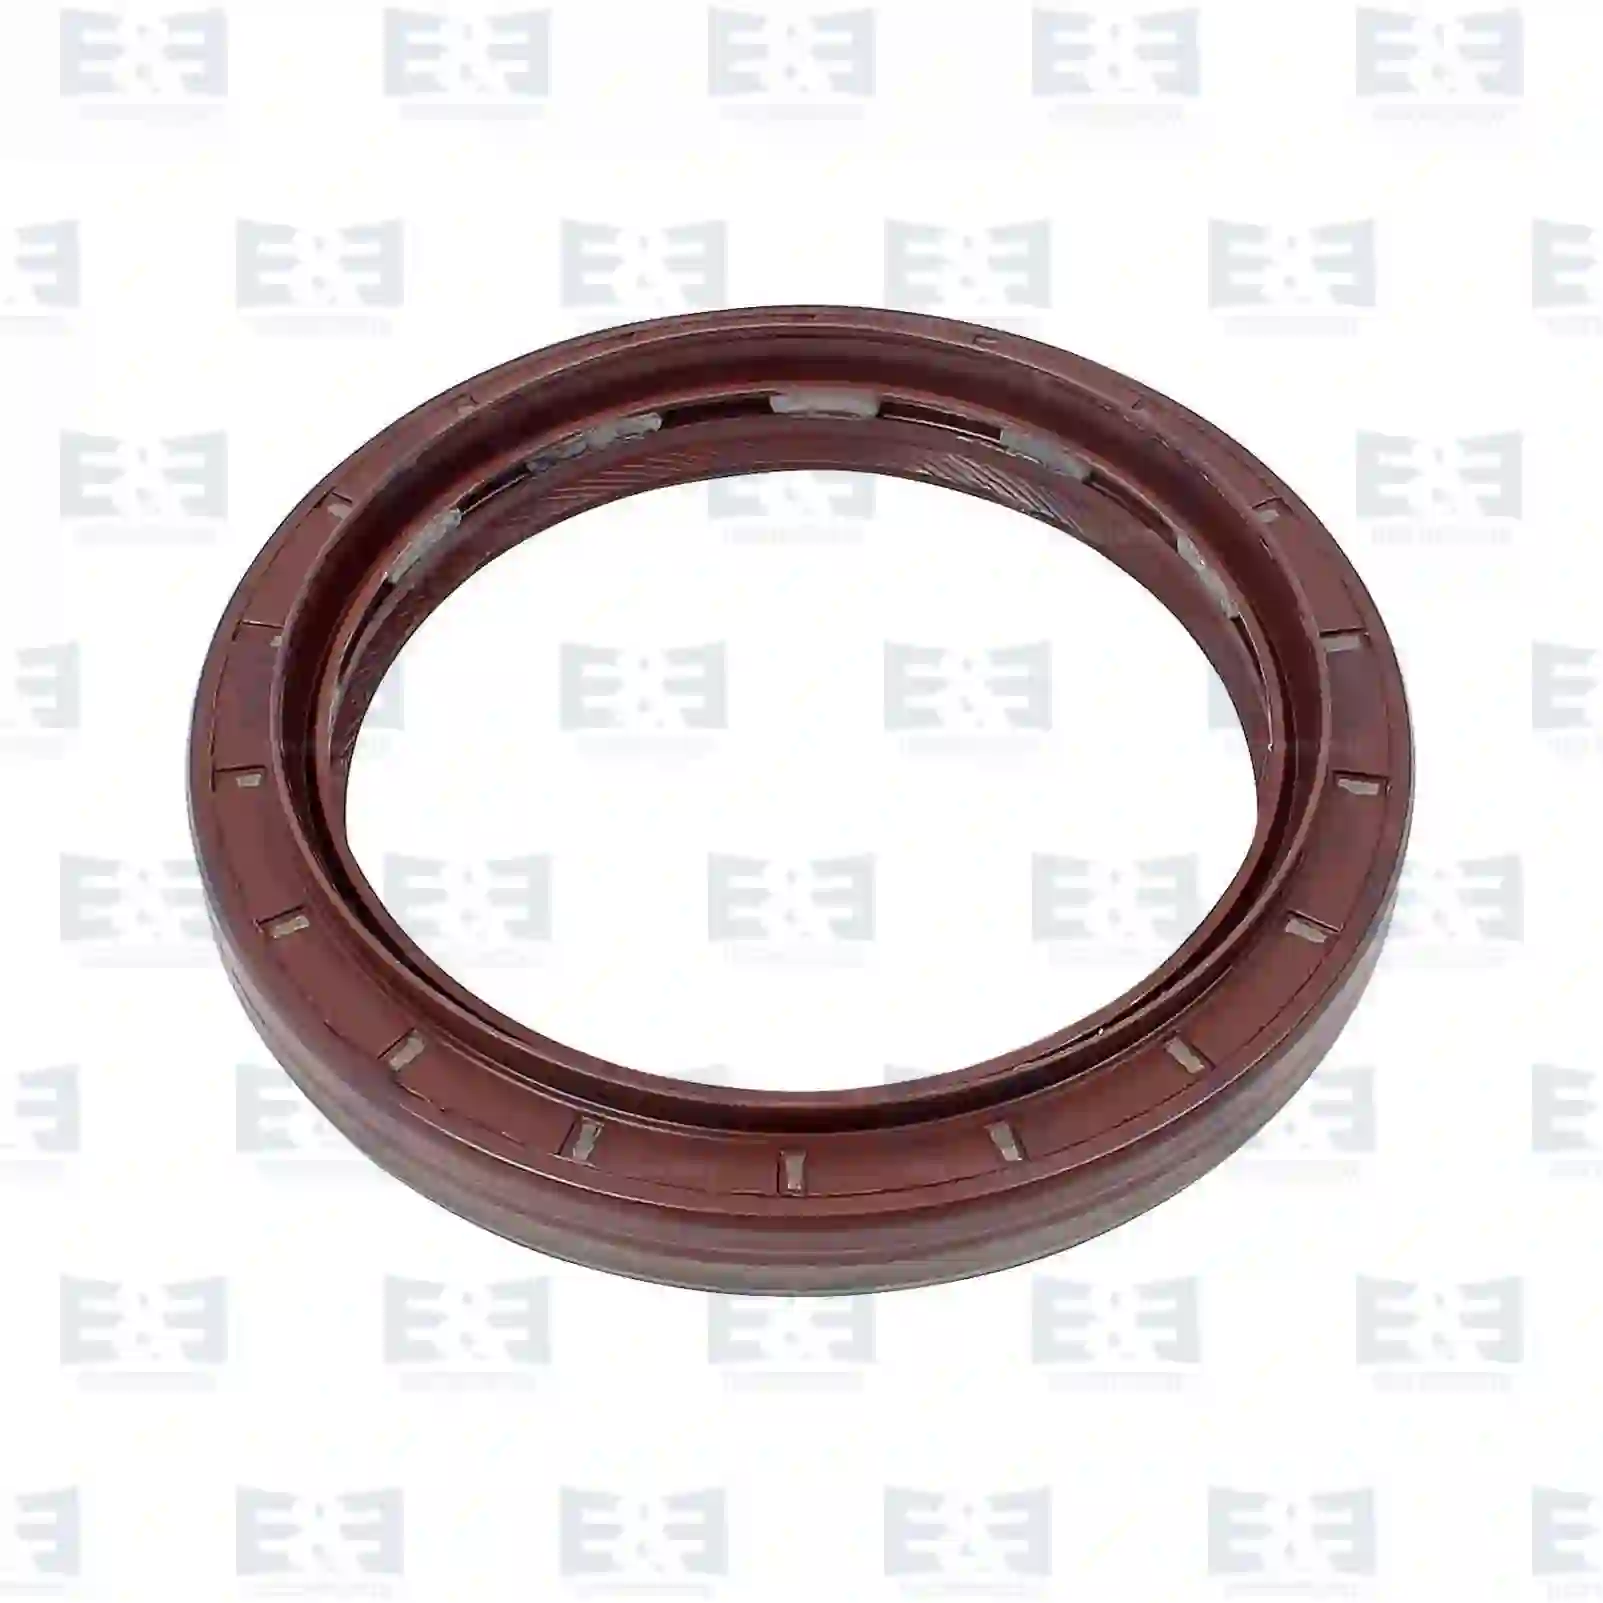 Differential Lock Oil seal, EE No 2E2279072 ,  oem no:0077477, 0538953, 538953, 77477 E&E Truck Spare Parts | Truck Spare Parts, Auotomotive Spare Parts